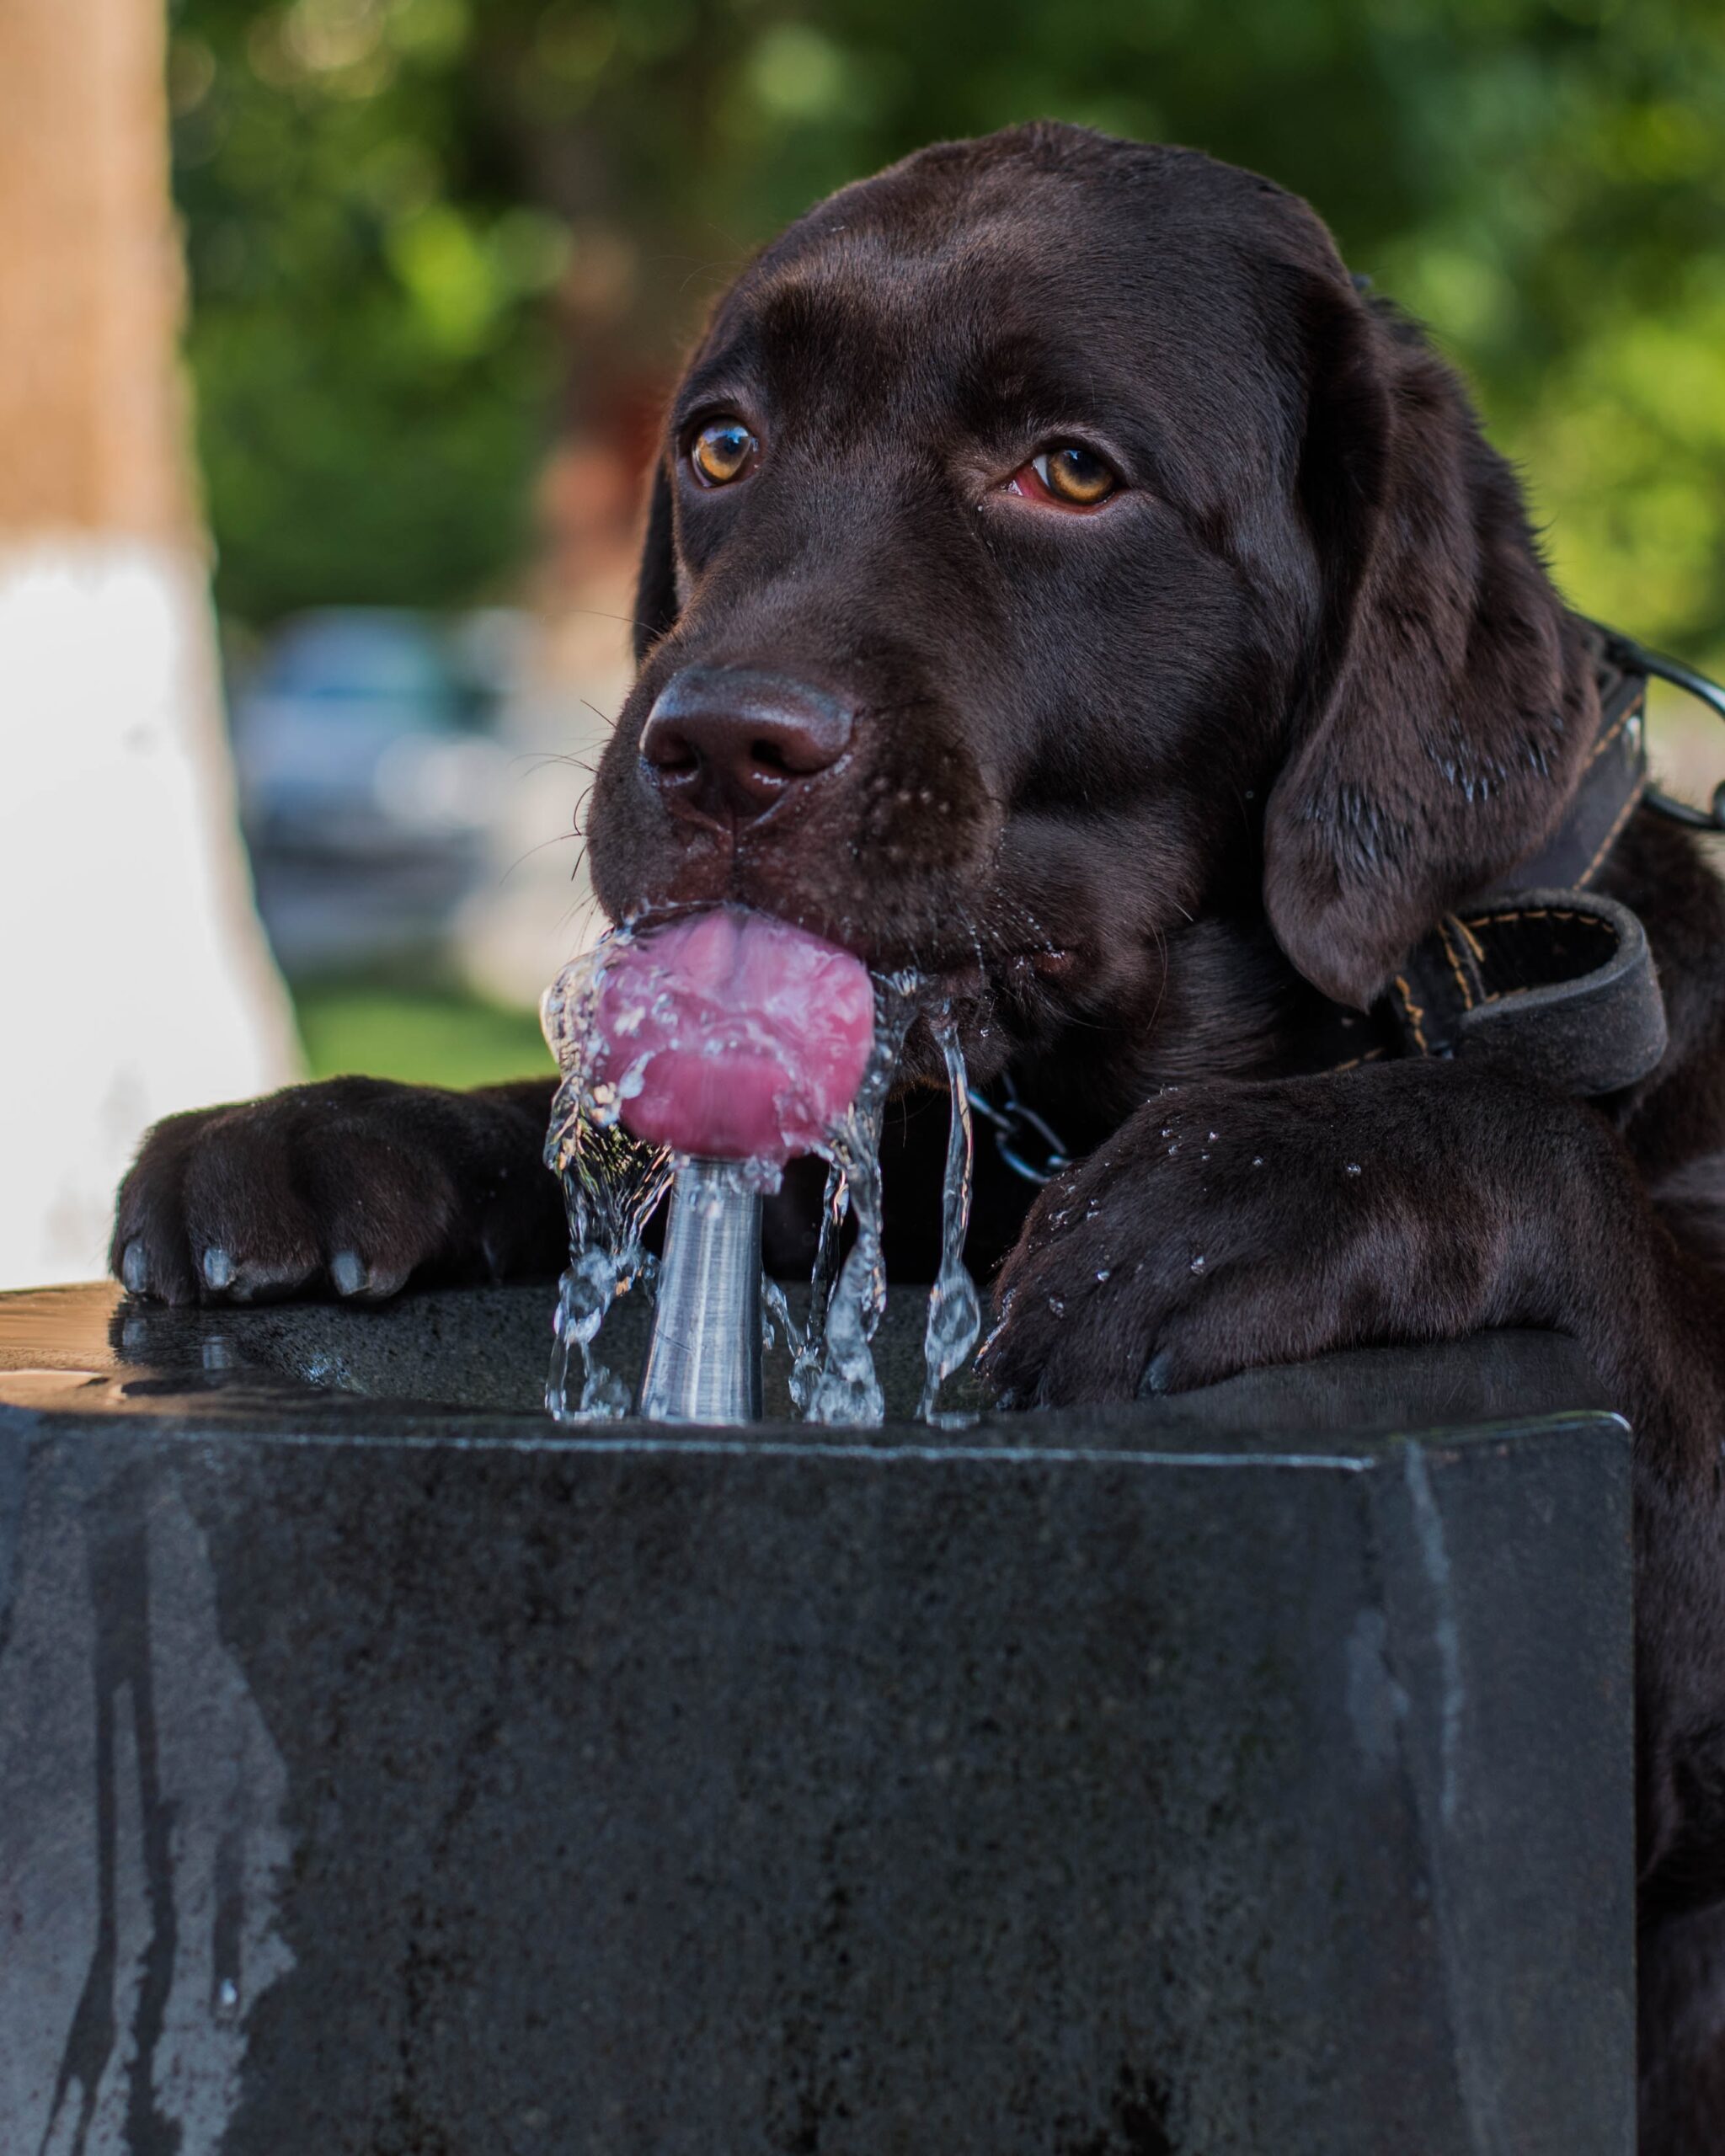 The Dehydration Dilemma: How to Safely Prevent and Treat Dehydration in Dogs